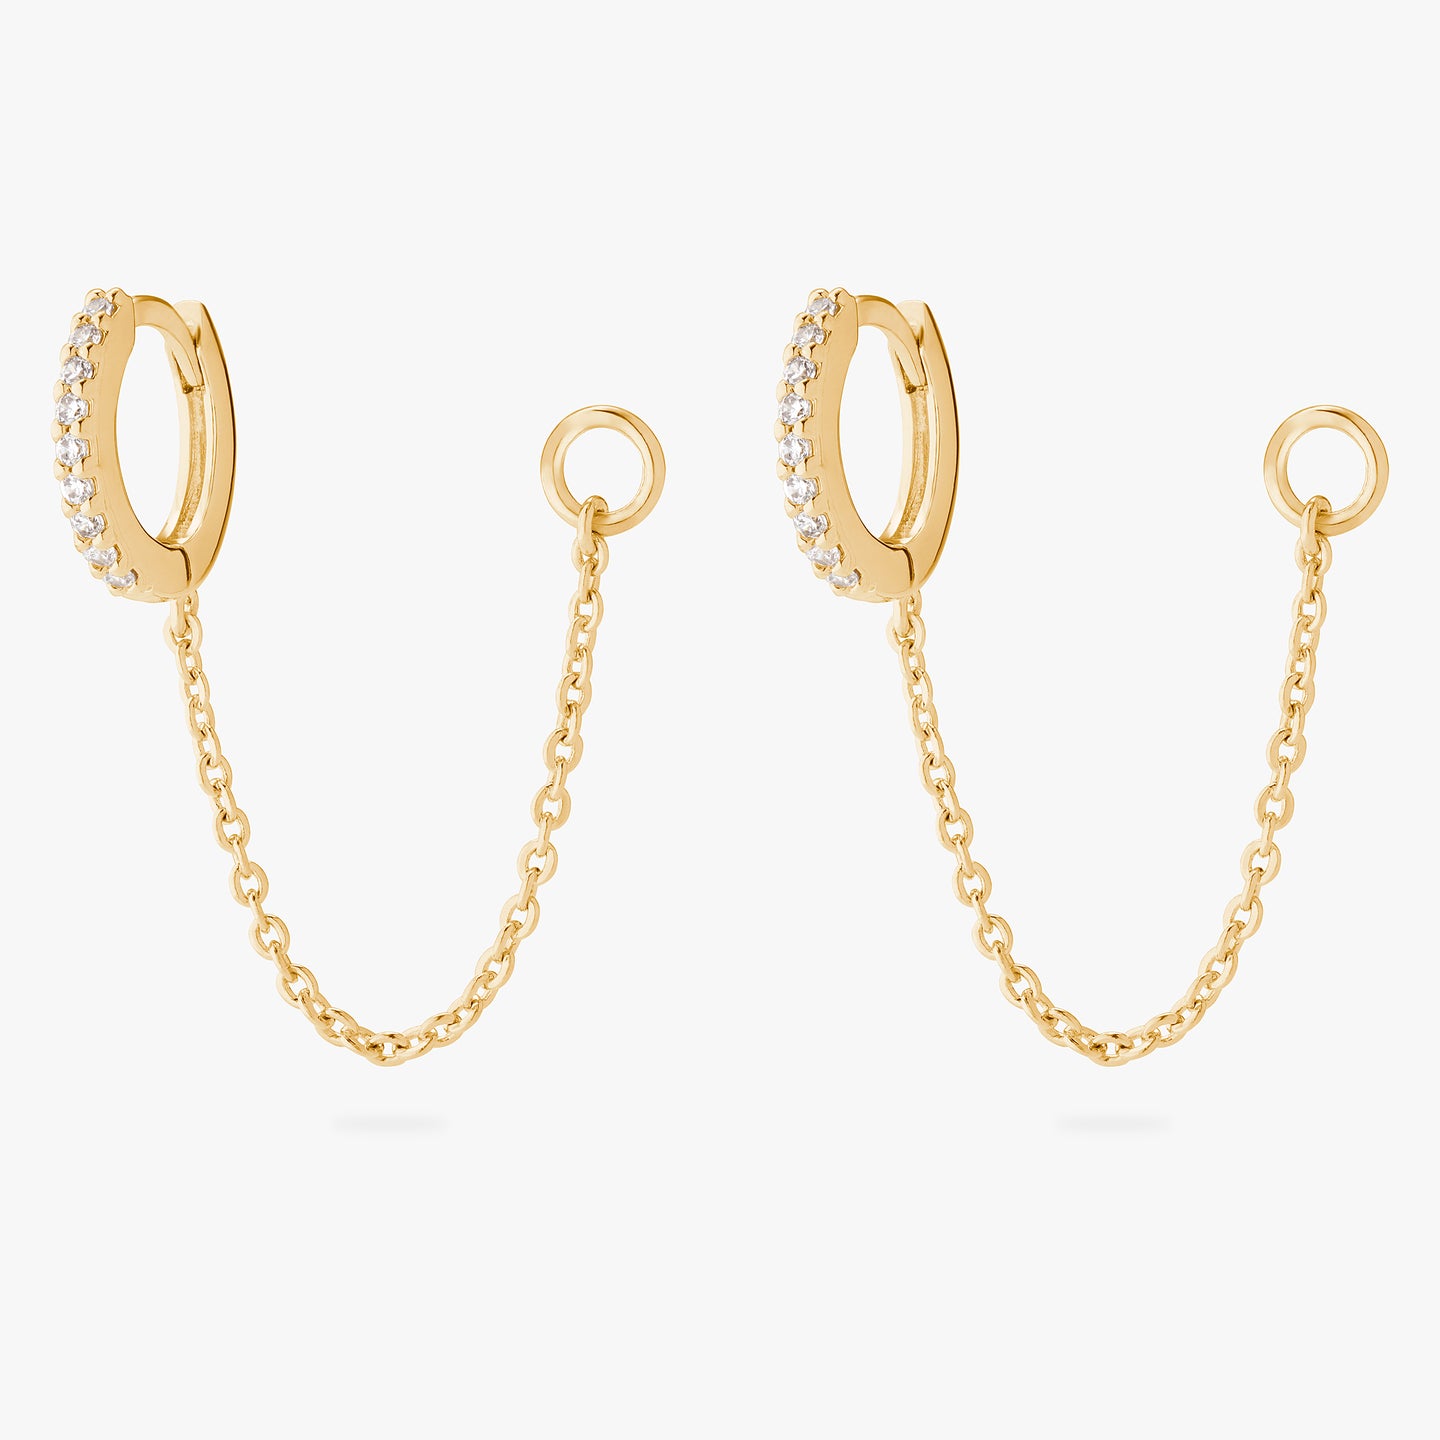 An image of a pair of gold/clear mini pave huggies with connector chains to open 4mm wide jump rings. [pair] color:null|gold/clear